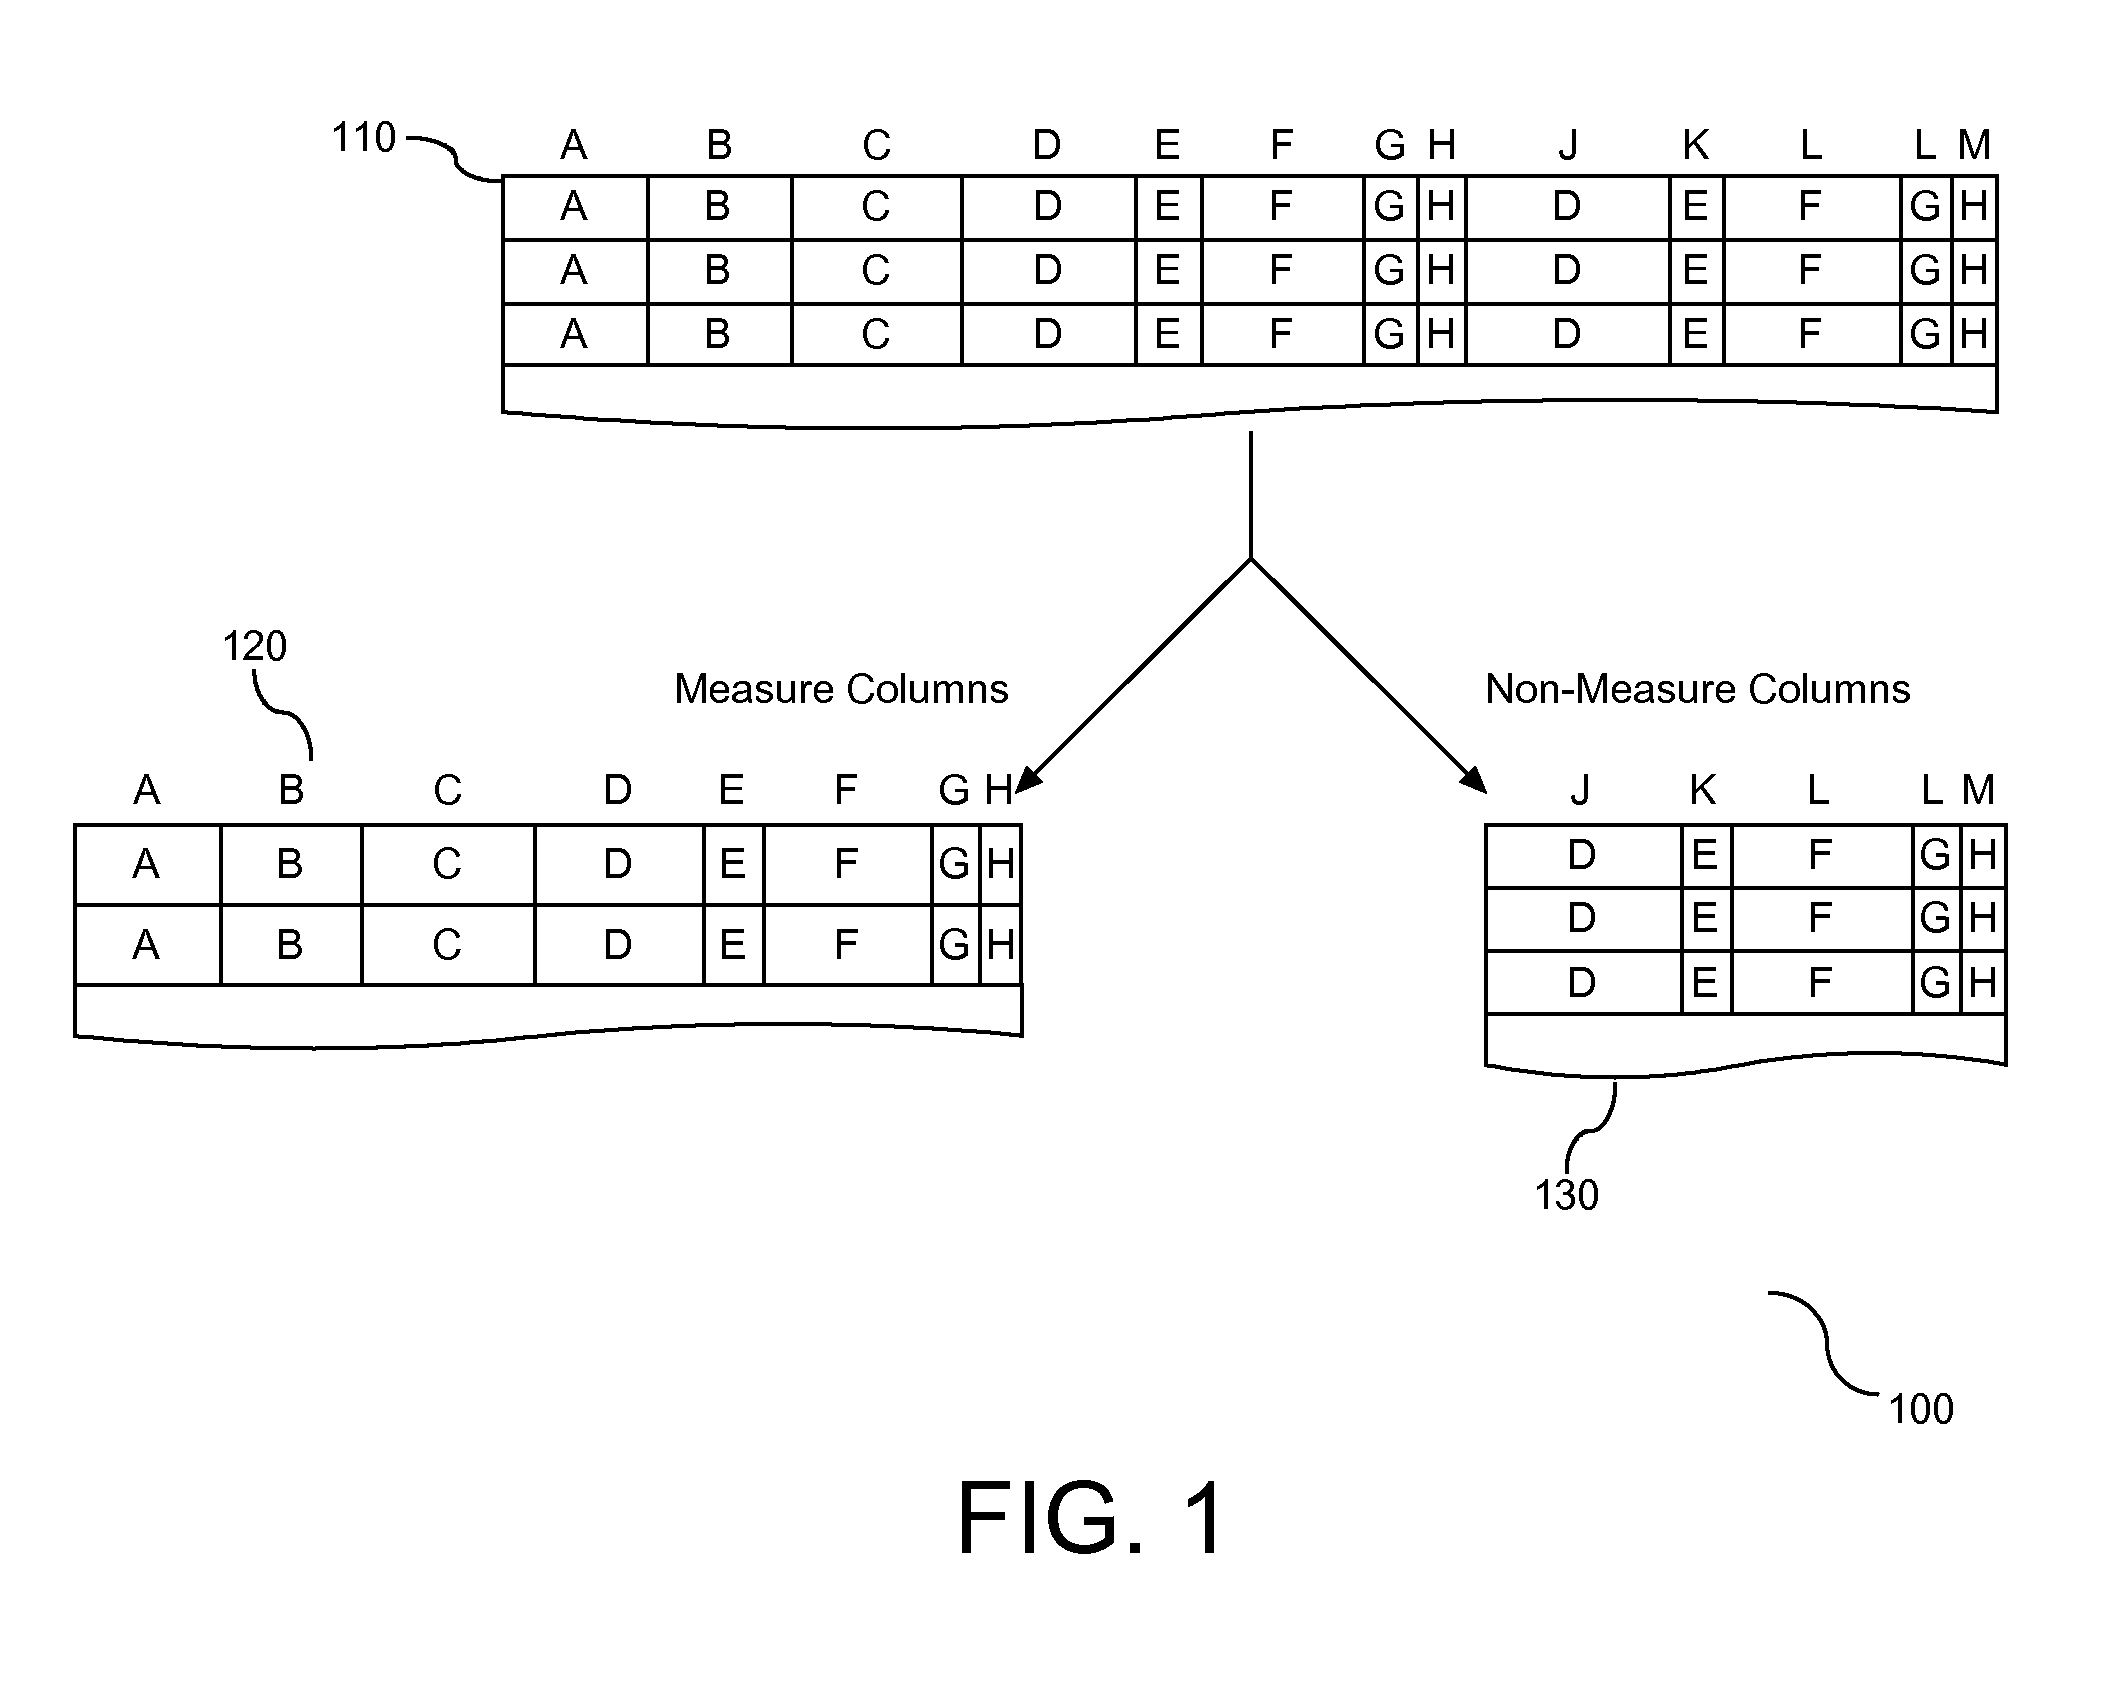 Method for laying out fields in a database in a hybrid of row-wise and column-wise ordering